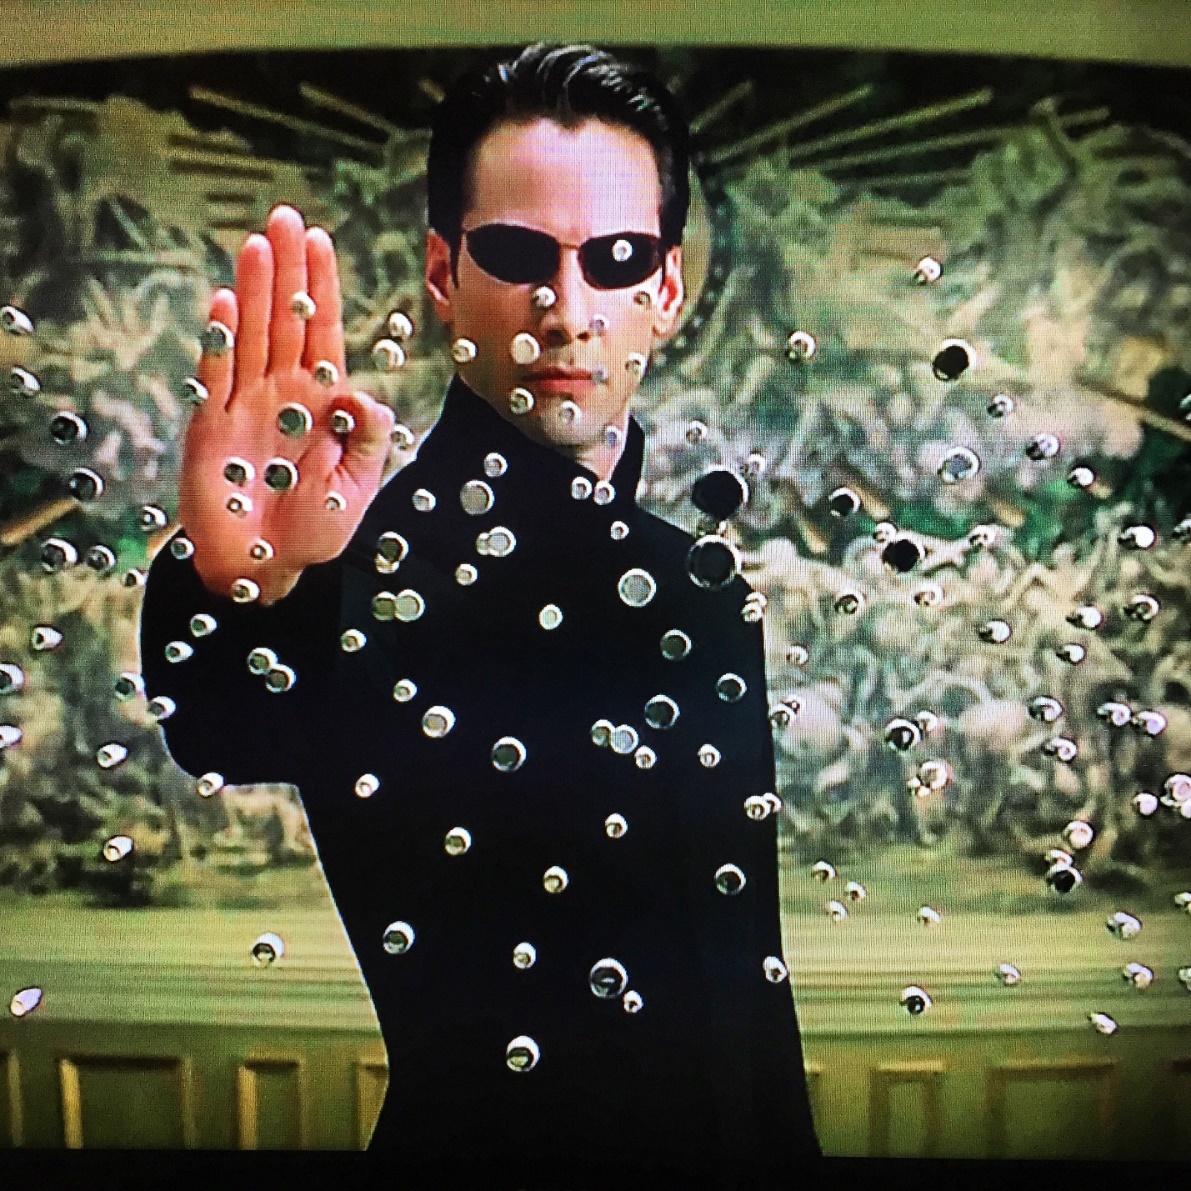 Keanu Reeves as Neo in The Matrix, a movie about simulation